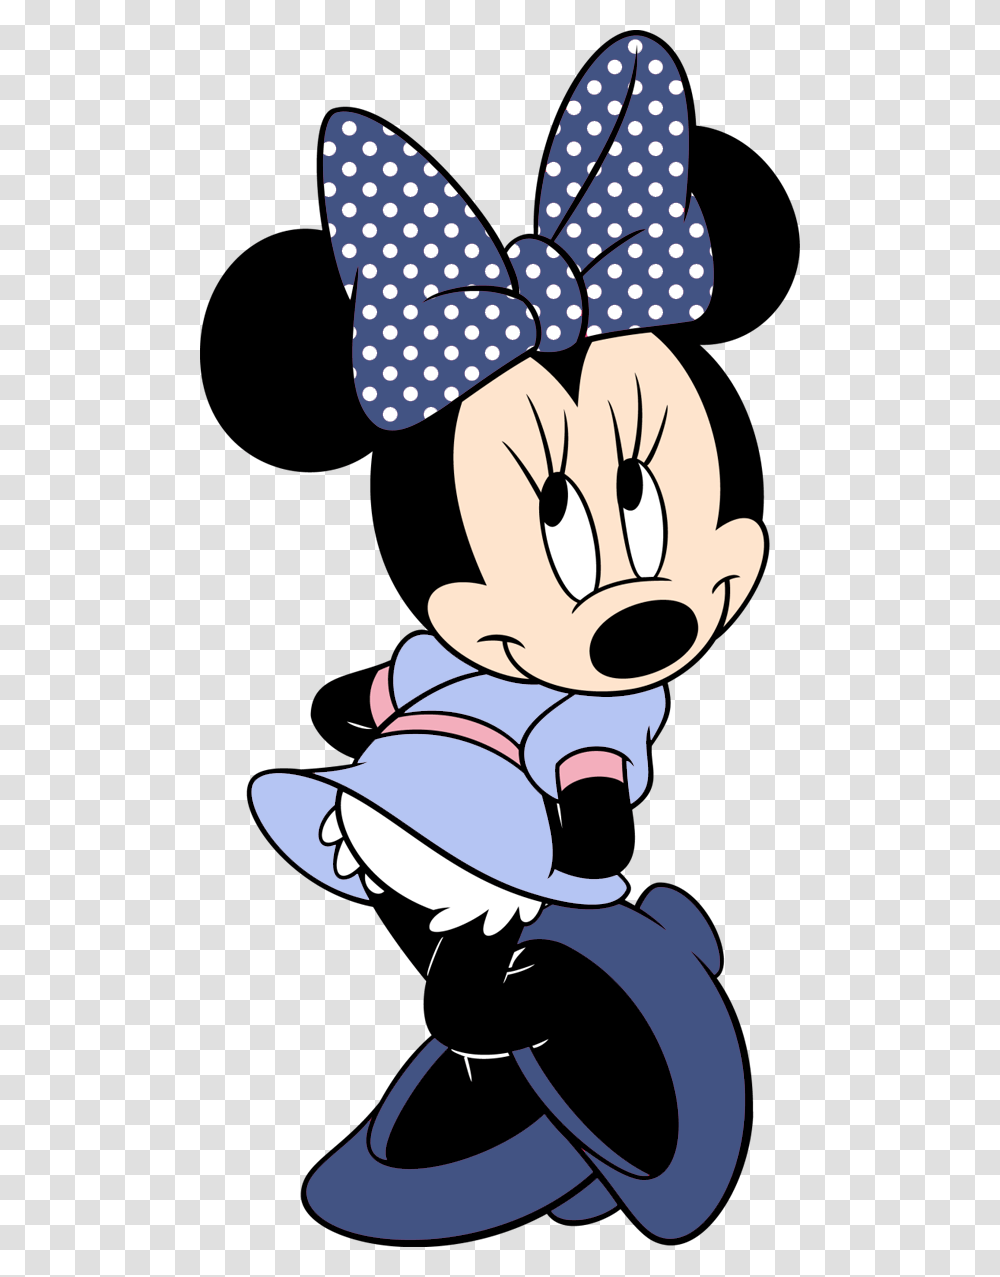 Blue Mouse Minnie Preto With Suit Clipart Mickey Festa Purple Minnie Mouse Clipart, Tie, Accessories, Accessory Transparent Png